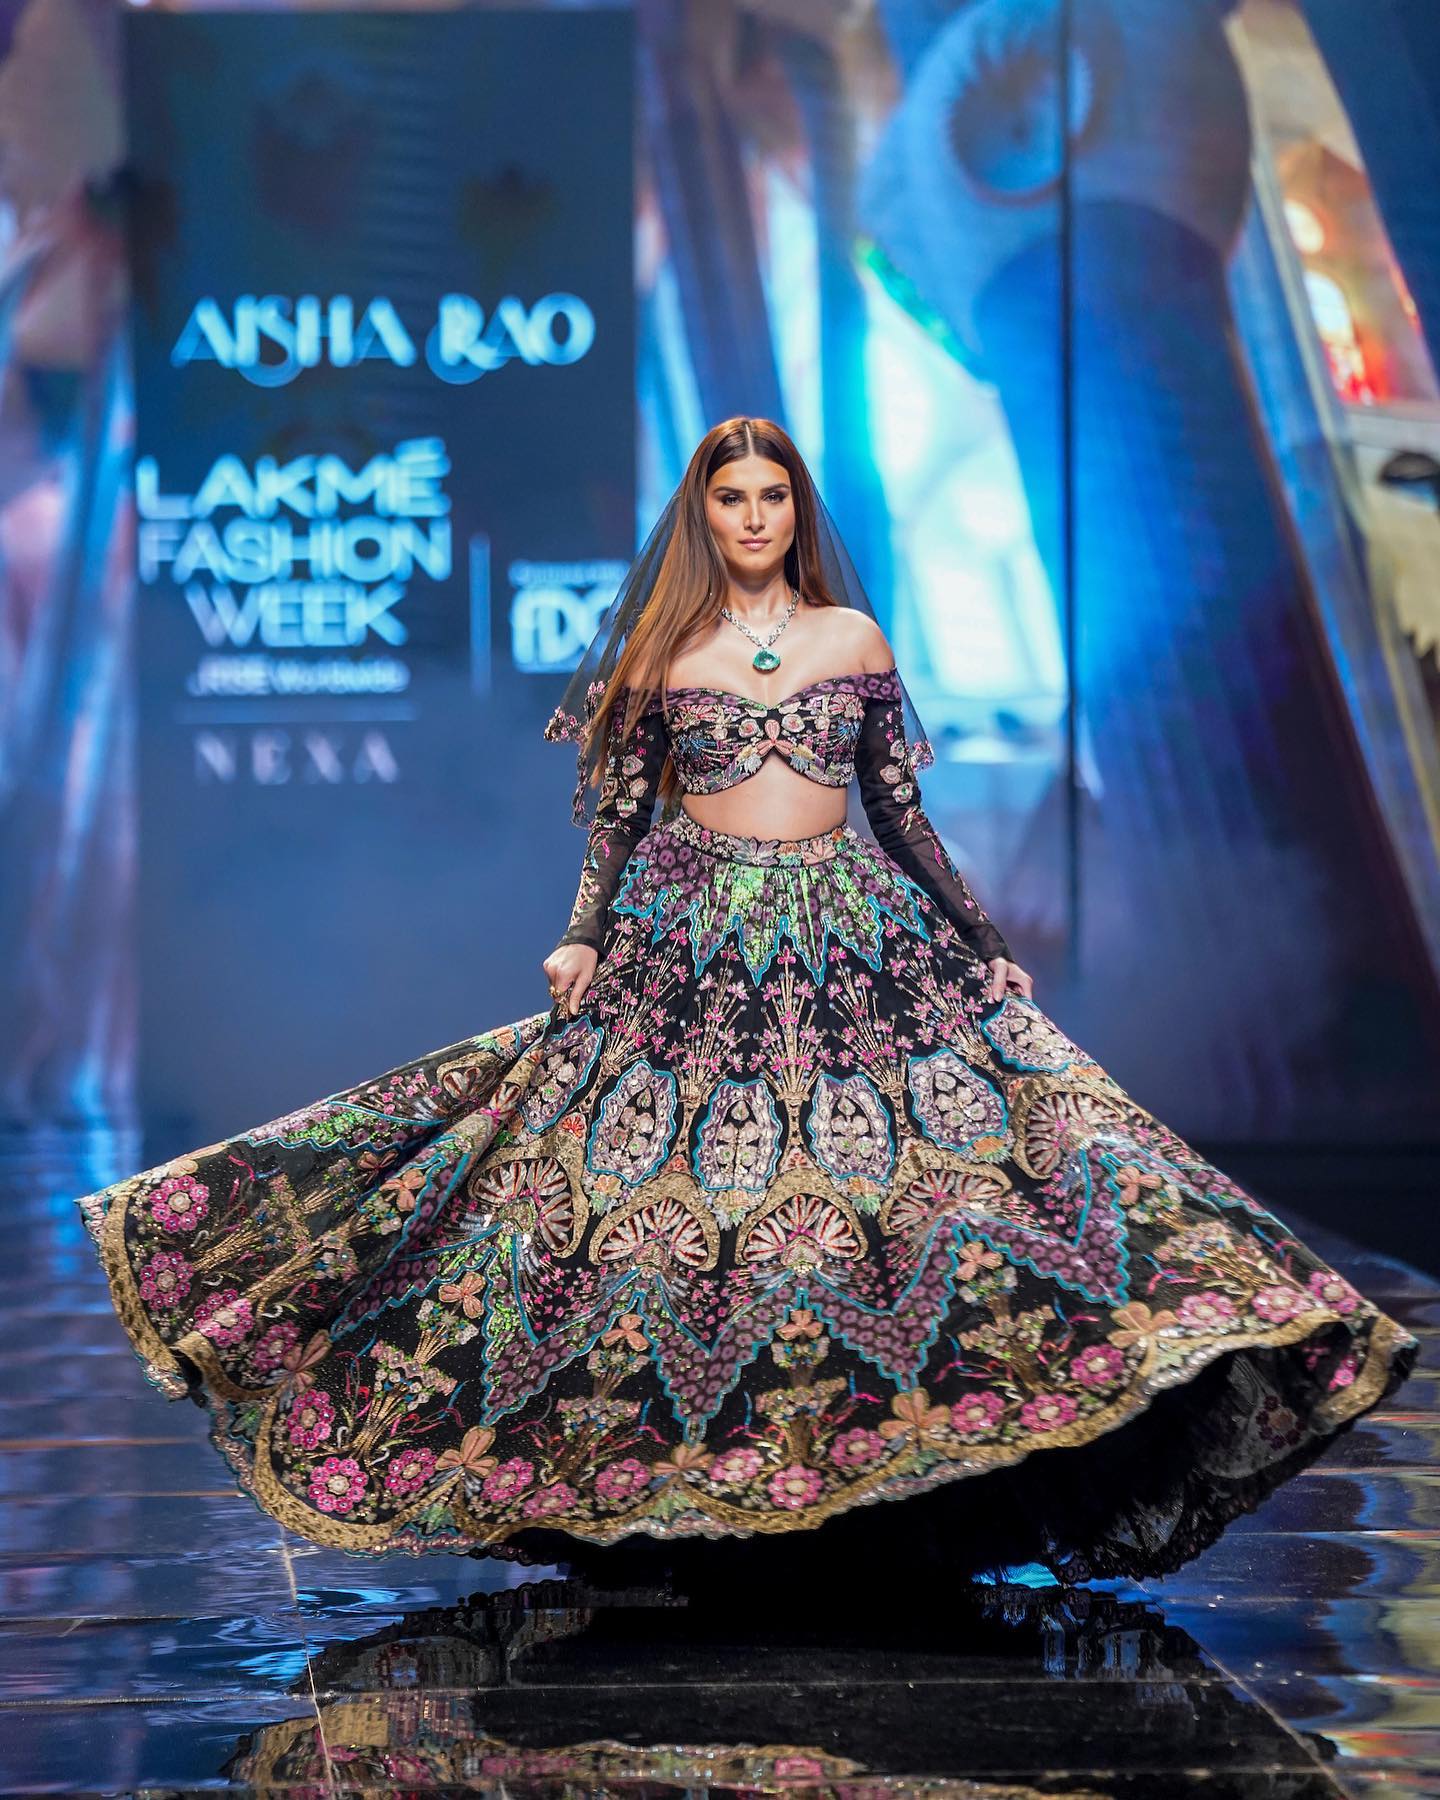 Round-Up of FDCI x Lakme Fashion Week October 2022